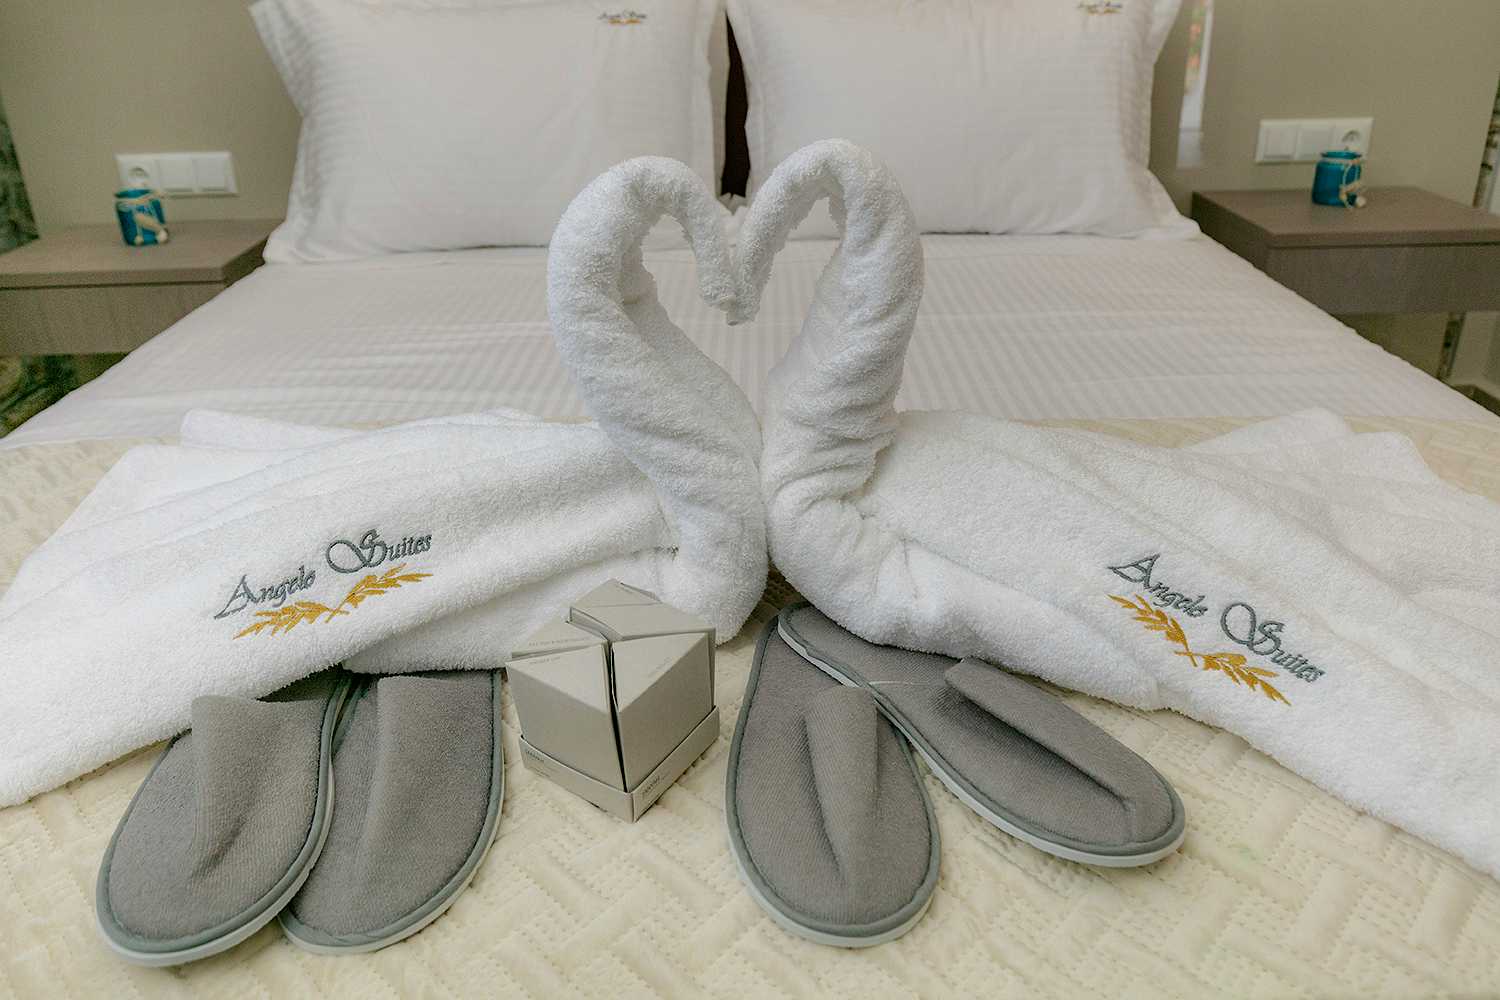 Photo Caption: Complimentary Extra Comforts Our suites offer more